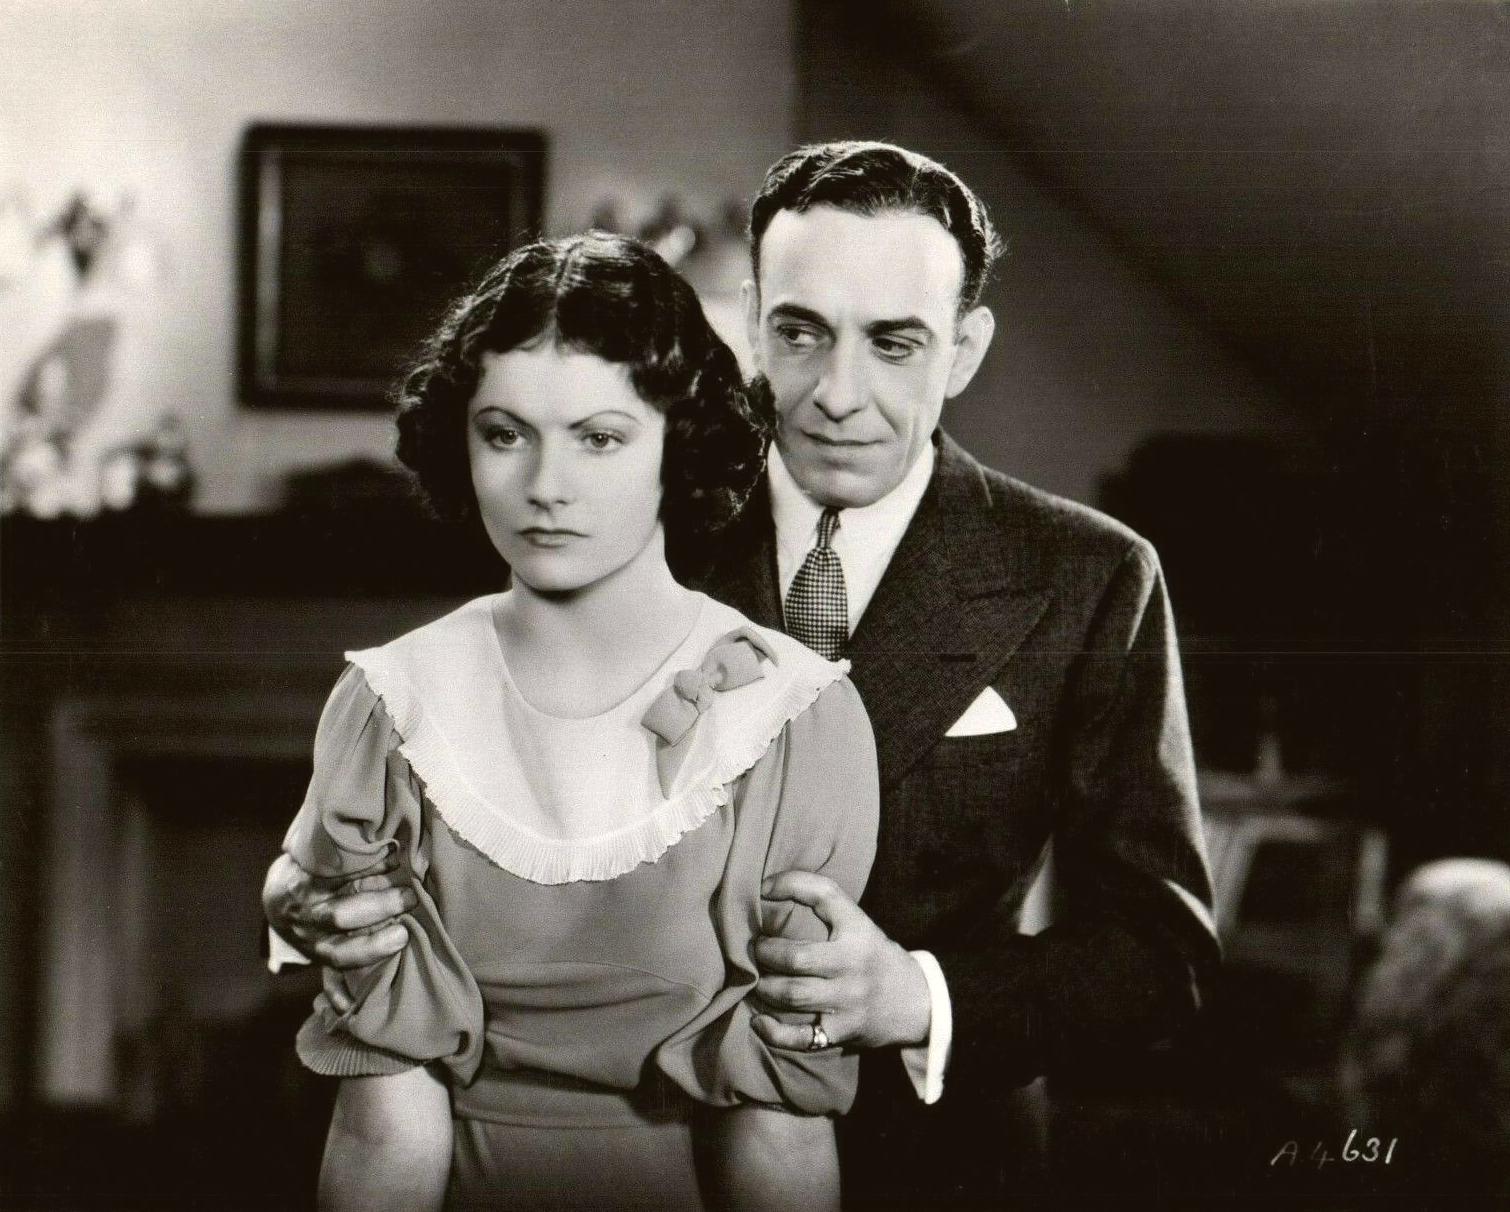 Photograph from Jury’s Evidence (1936) (3) featuring Hartley Power and Margaret Lockwood